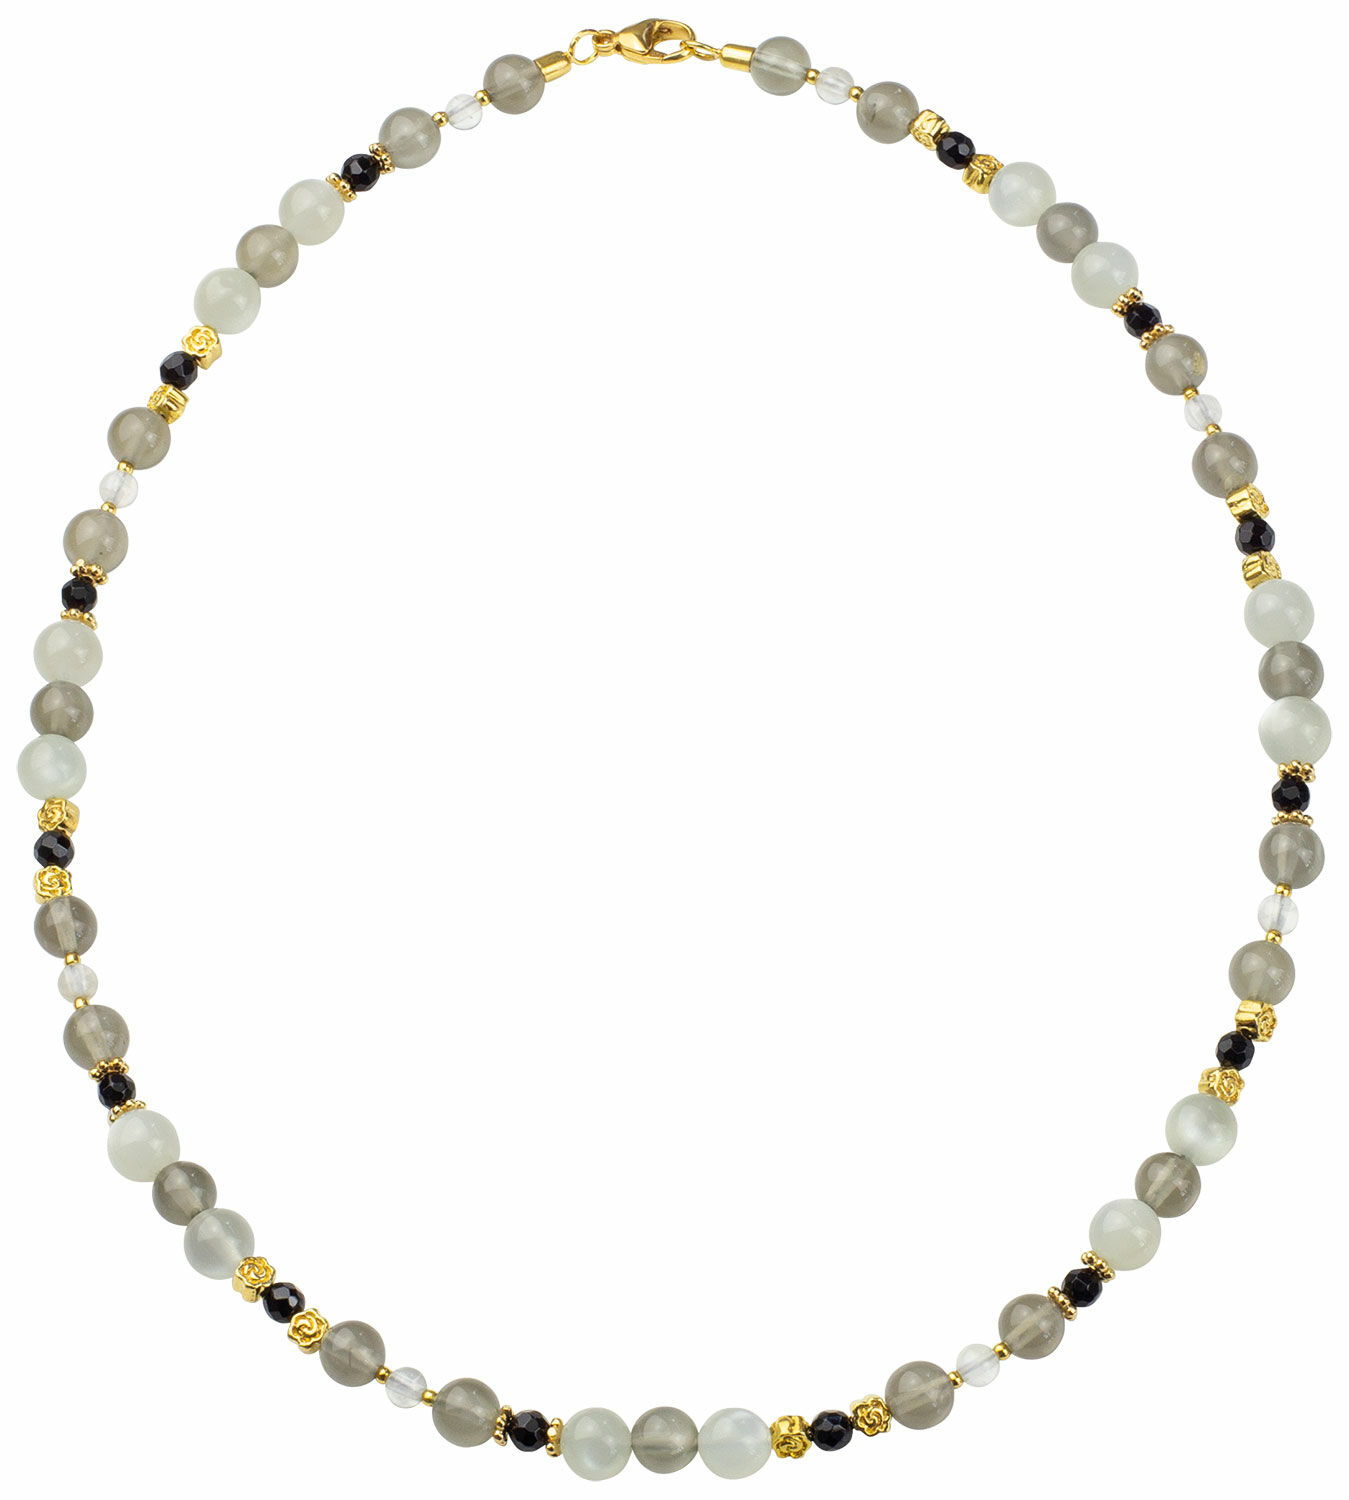 Necklace "Bright Moon" by Ray Alba